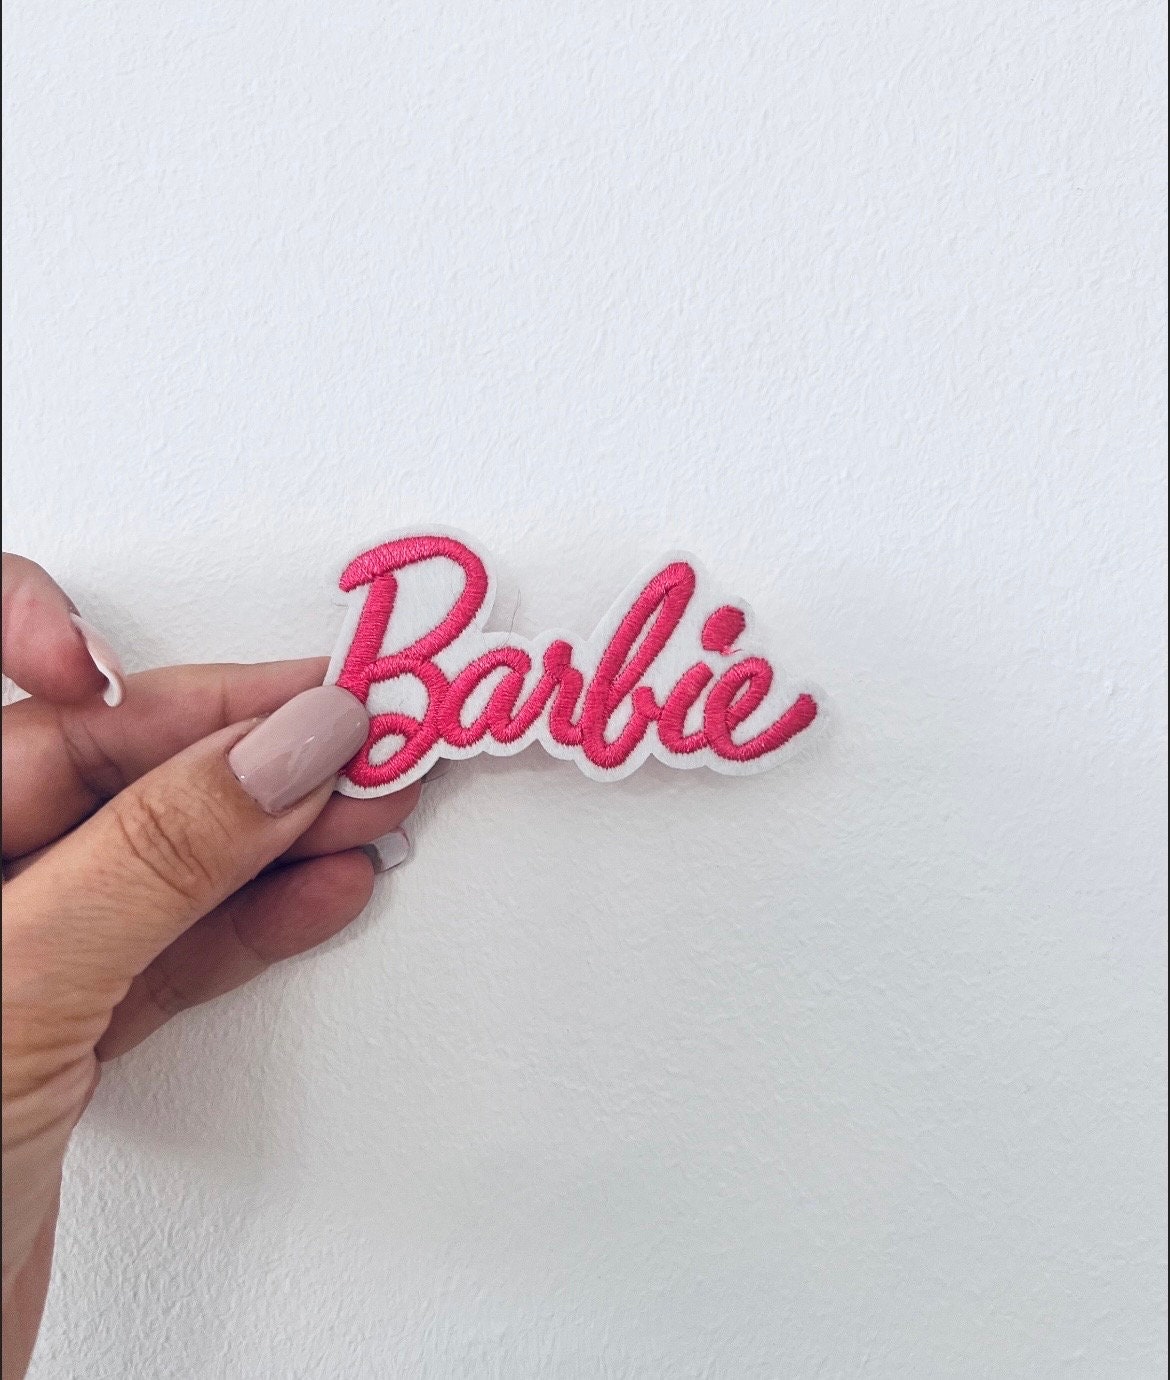 This Barbie is a scout”, I Dream, Believe & Lead! – Mad About Patches